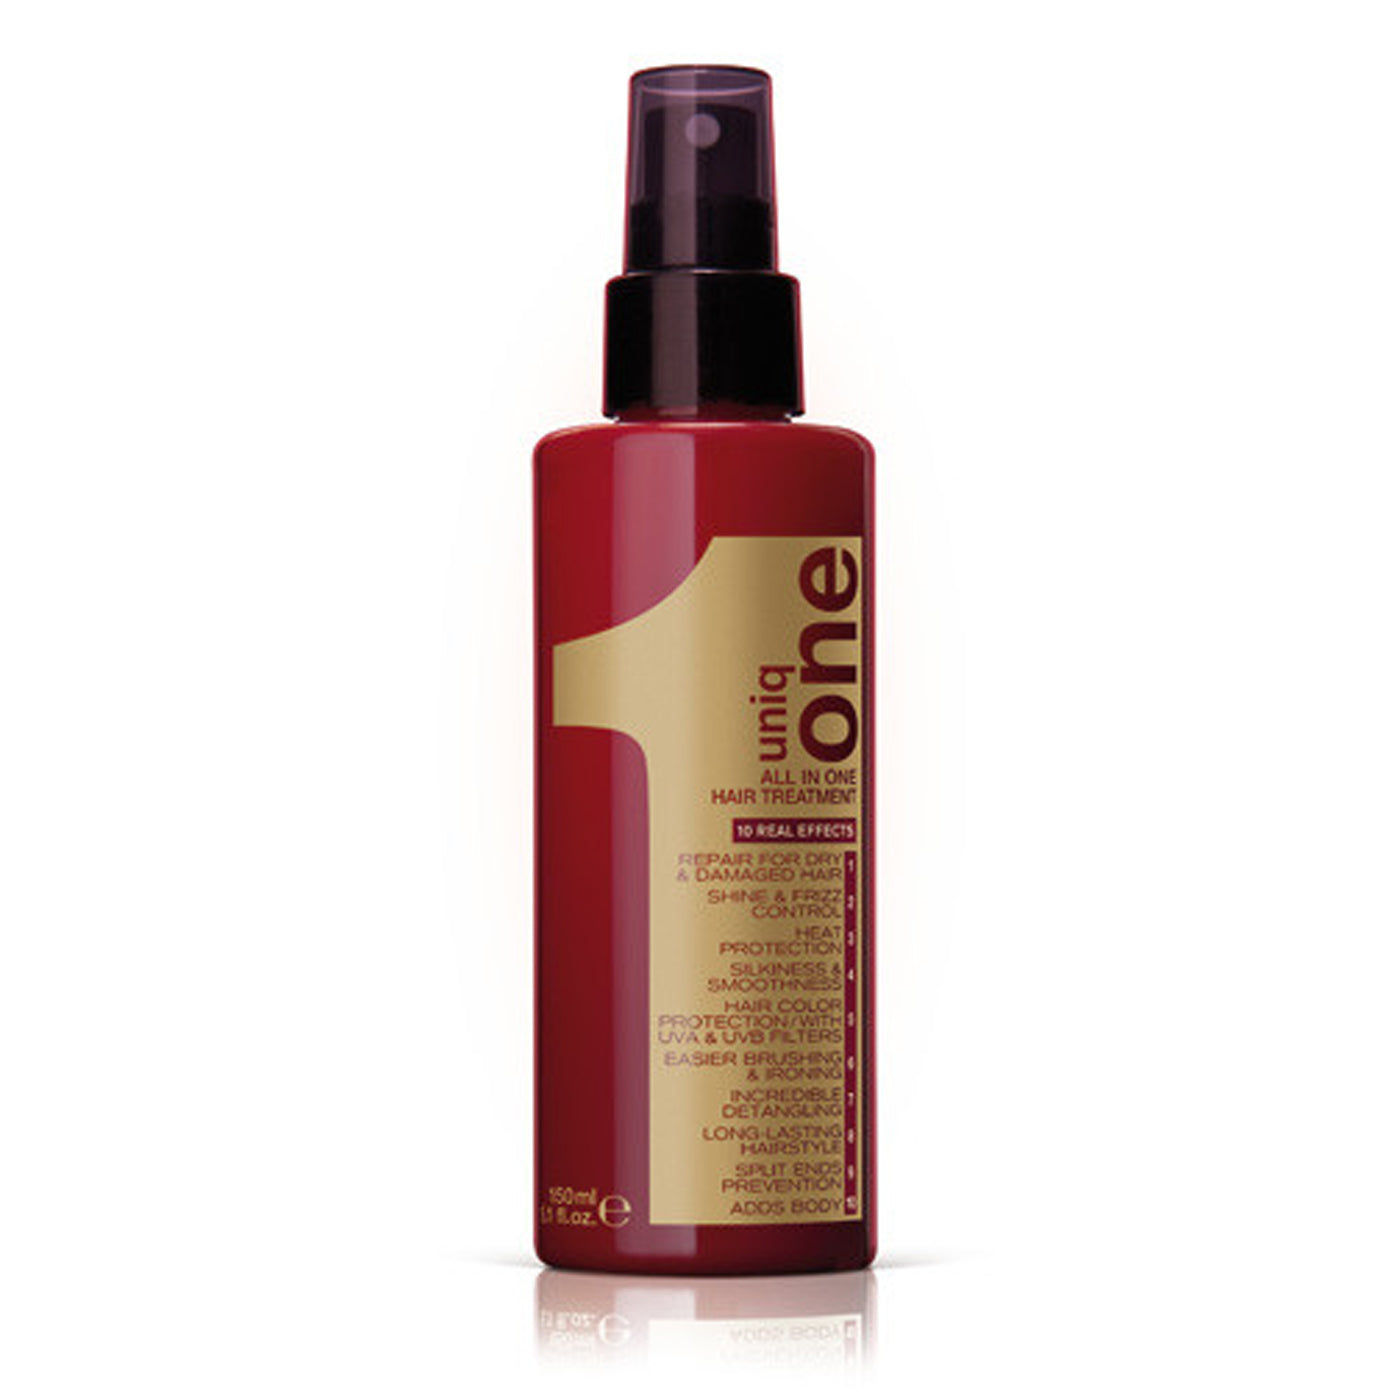 Revlon Uniq 1 All in One Treatment Spray (150ml) - Ultimate Hair and Beauty